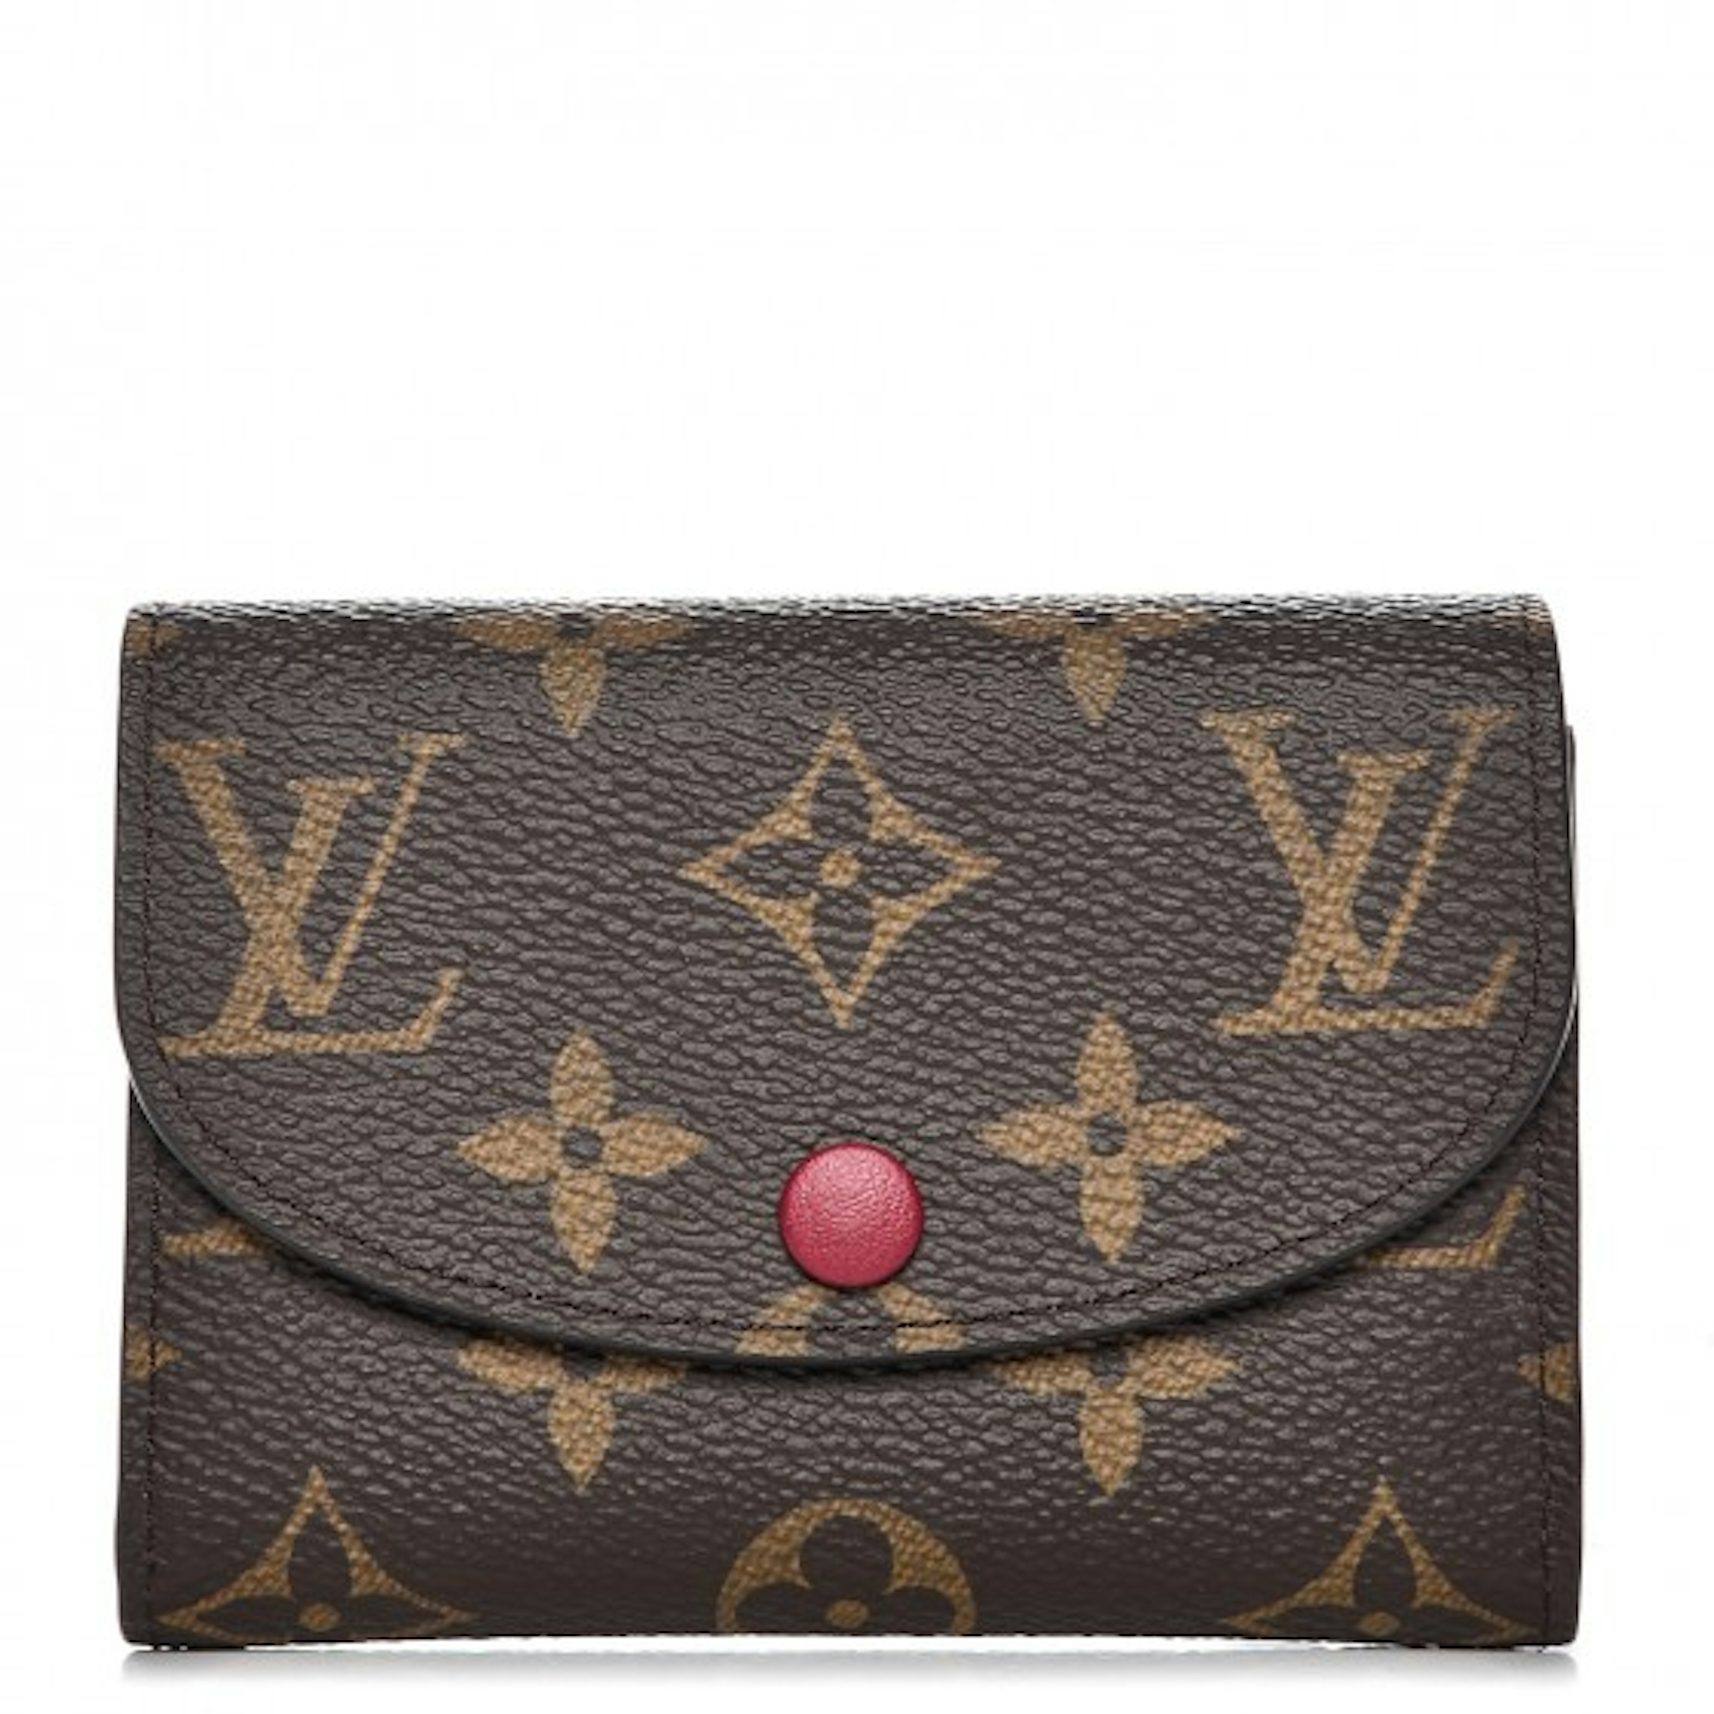 Products by Louis Vuitton: Rosalie Coin Purse